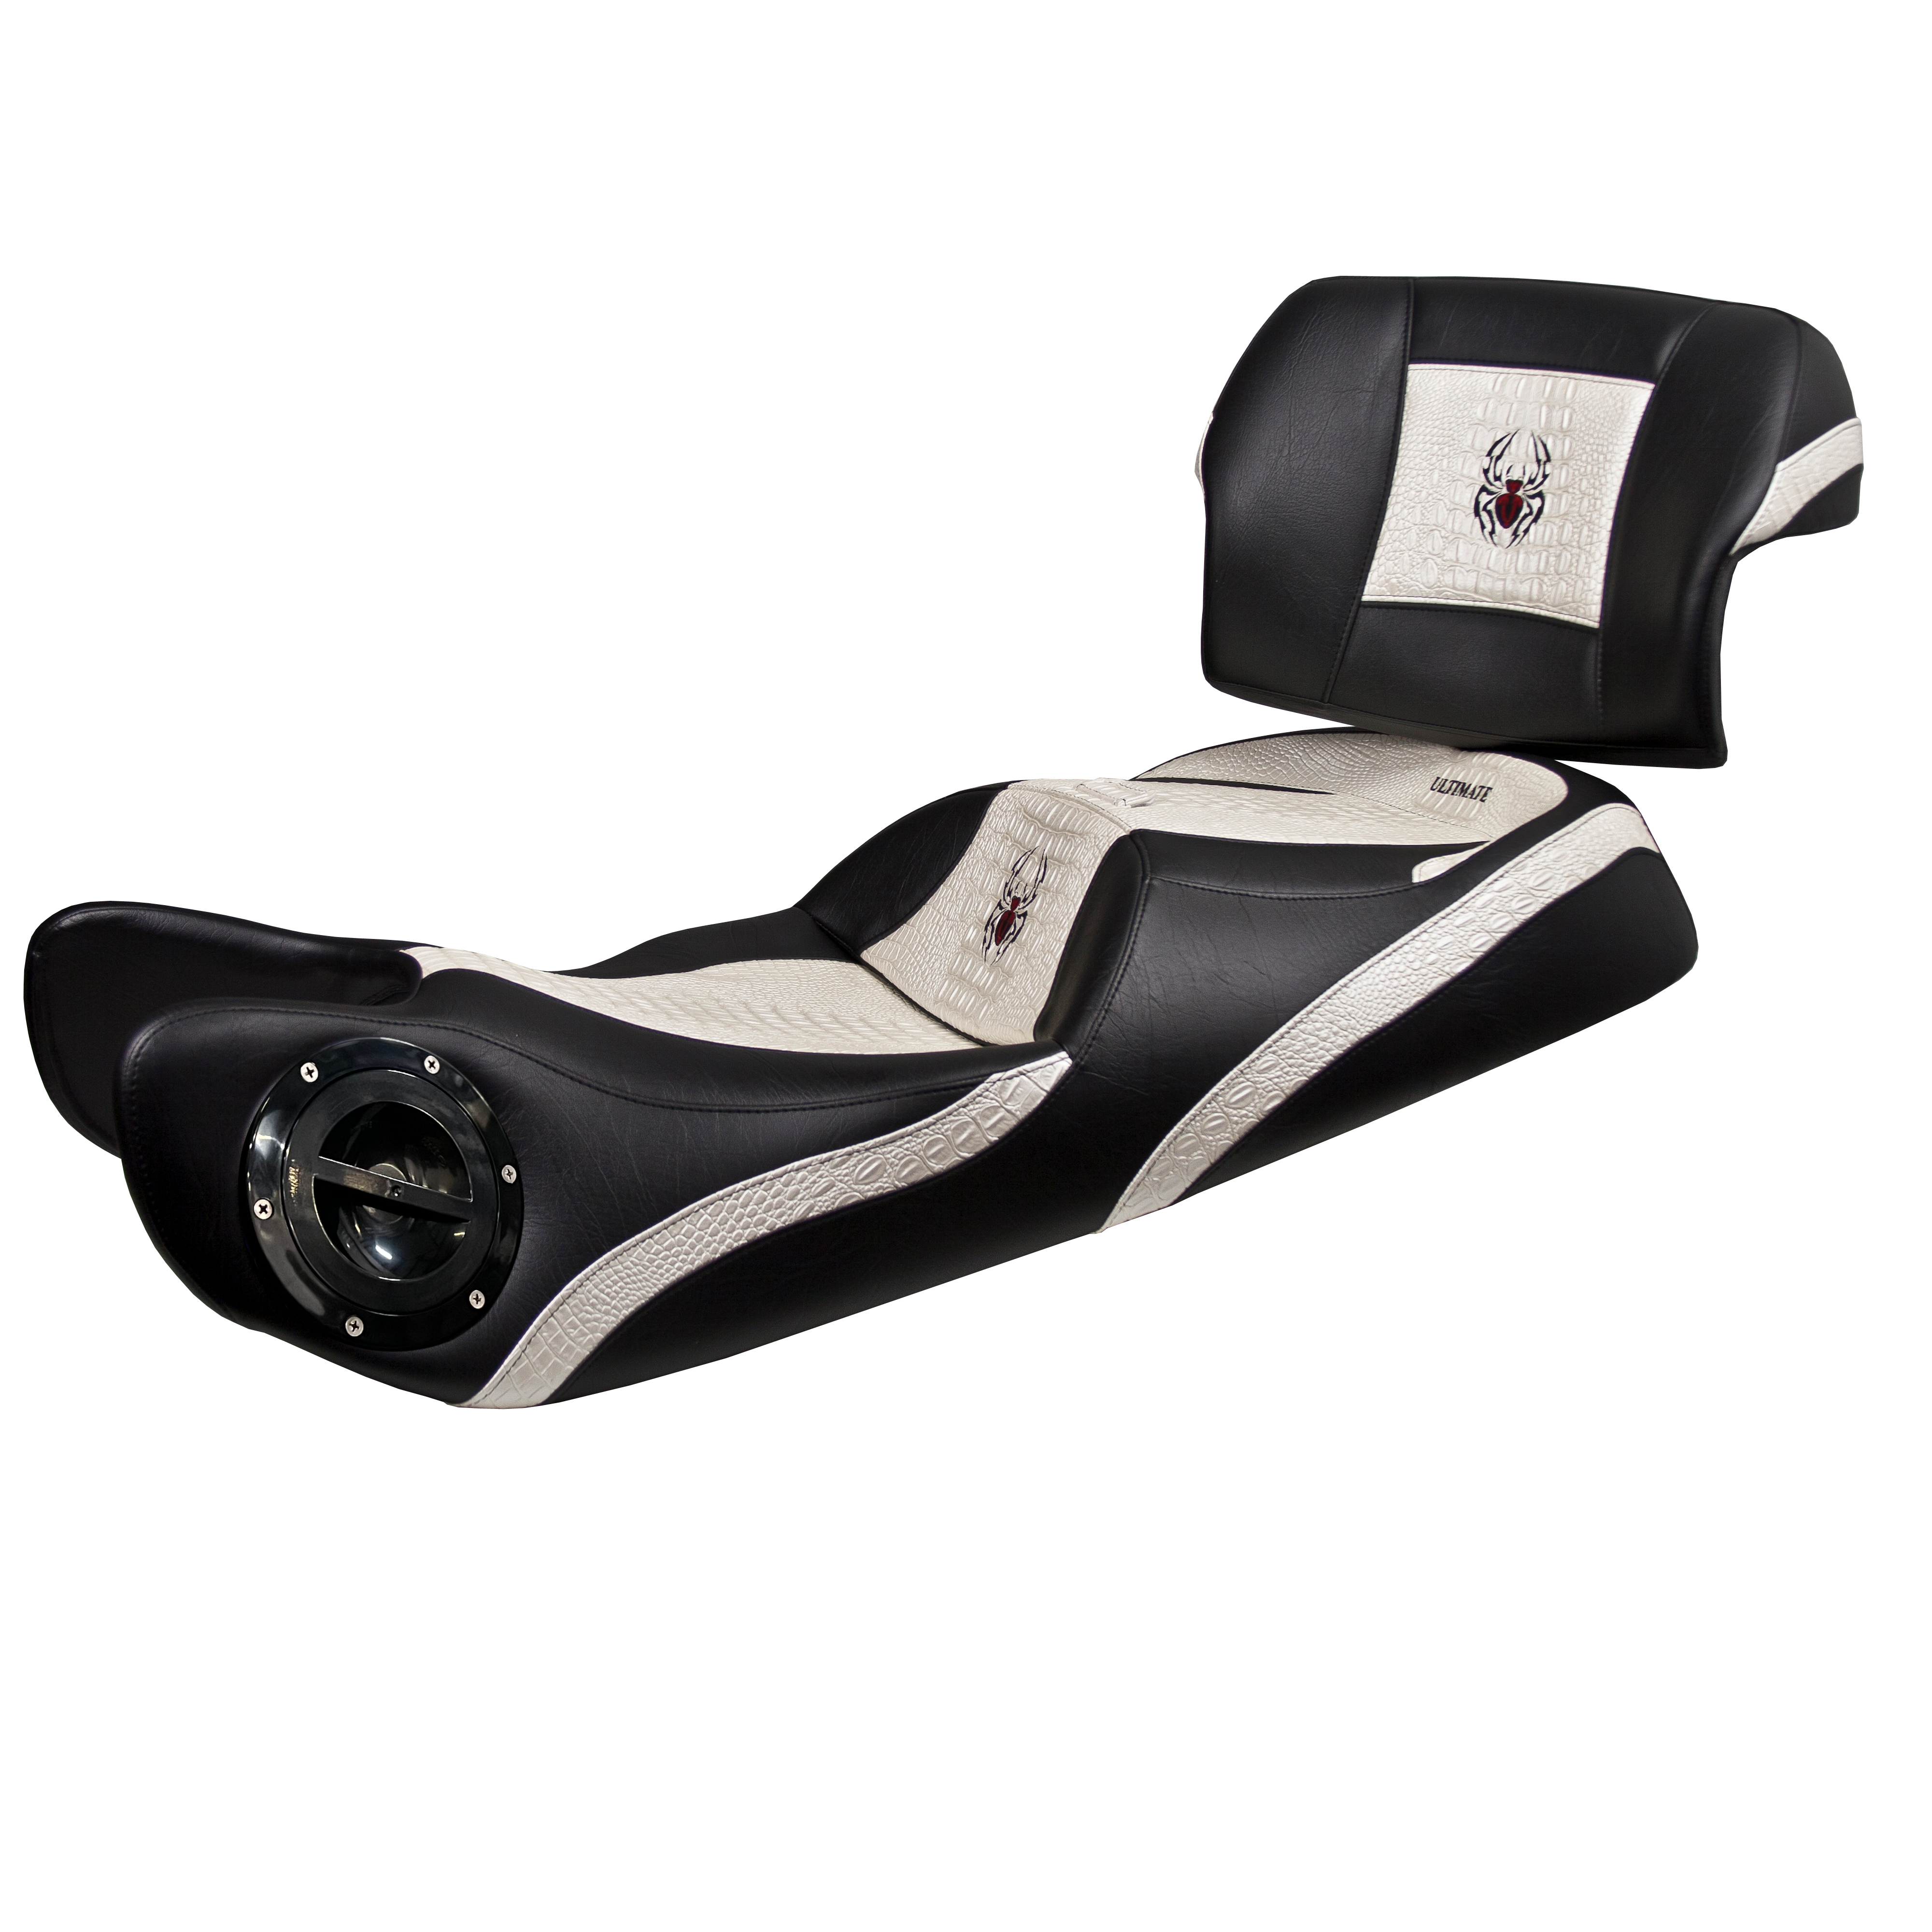 Spyder RT Seat, Driver Backrest and Passenger Backrest - Ultimate Pearl White Croc Inlays, Logos and Fuel Door (2010 - 2019)